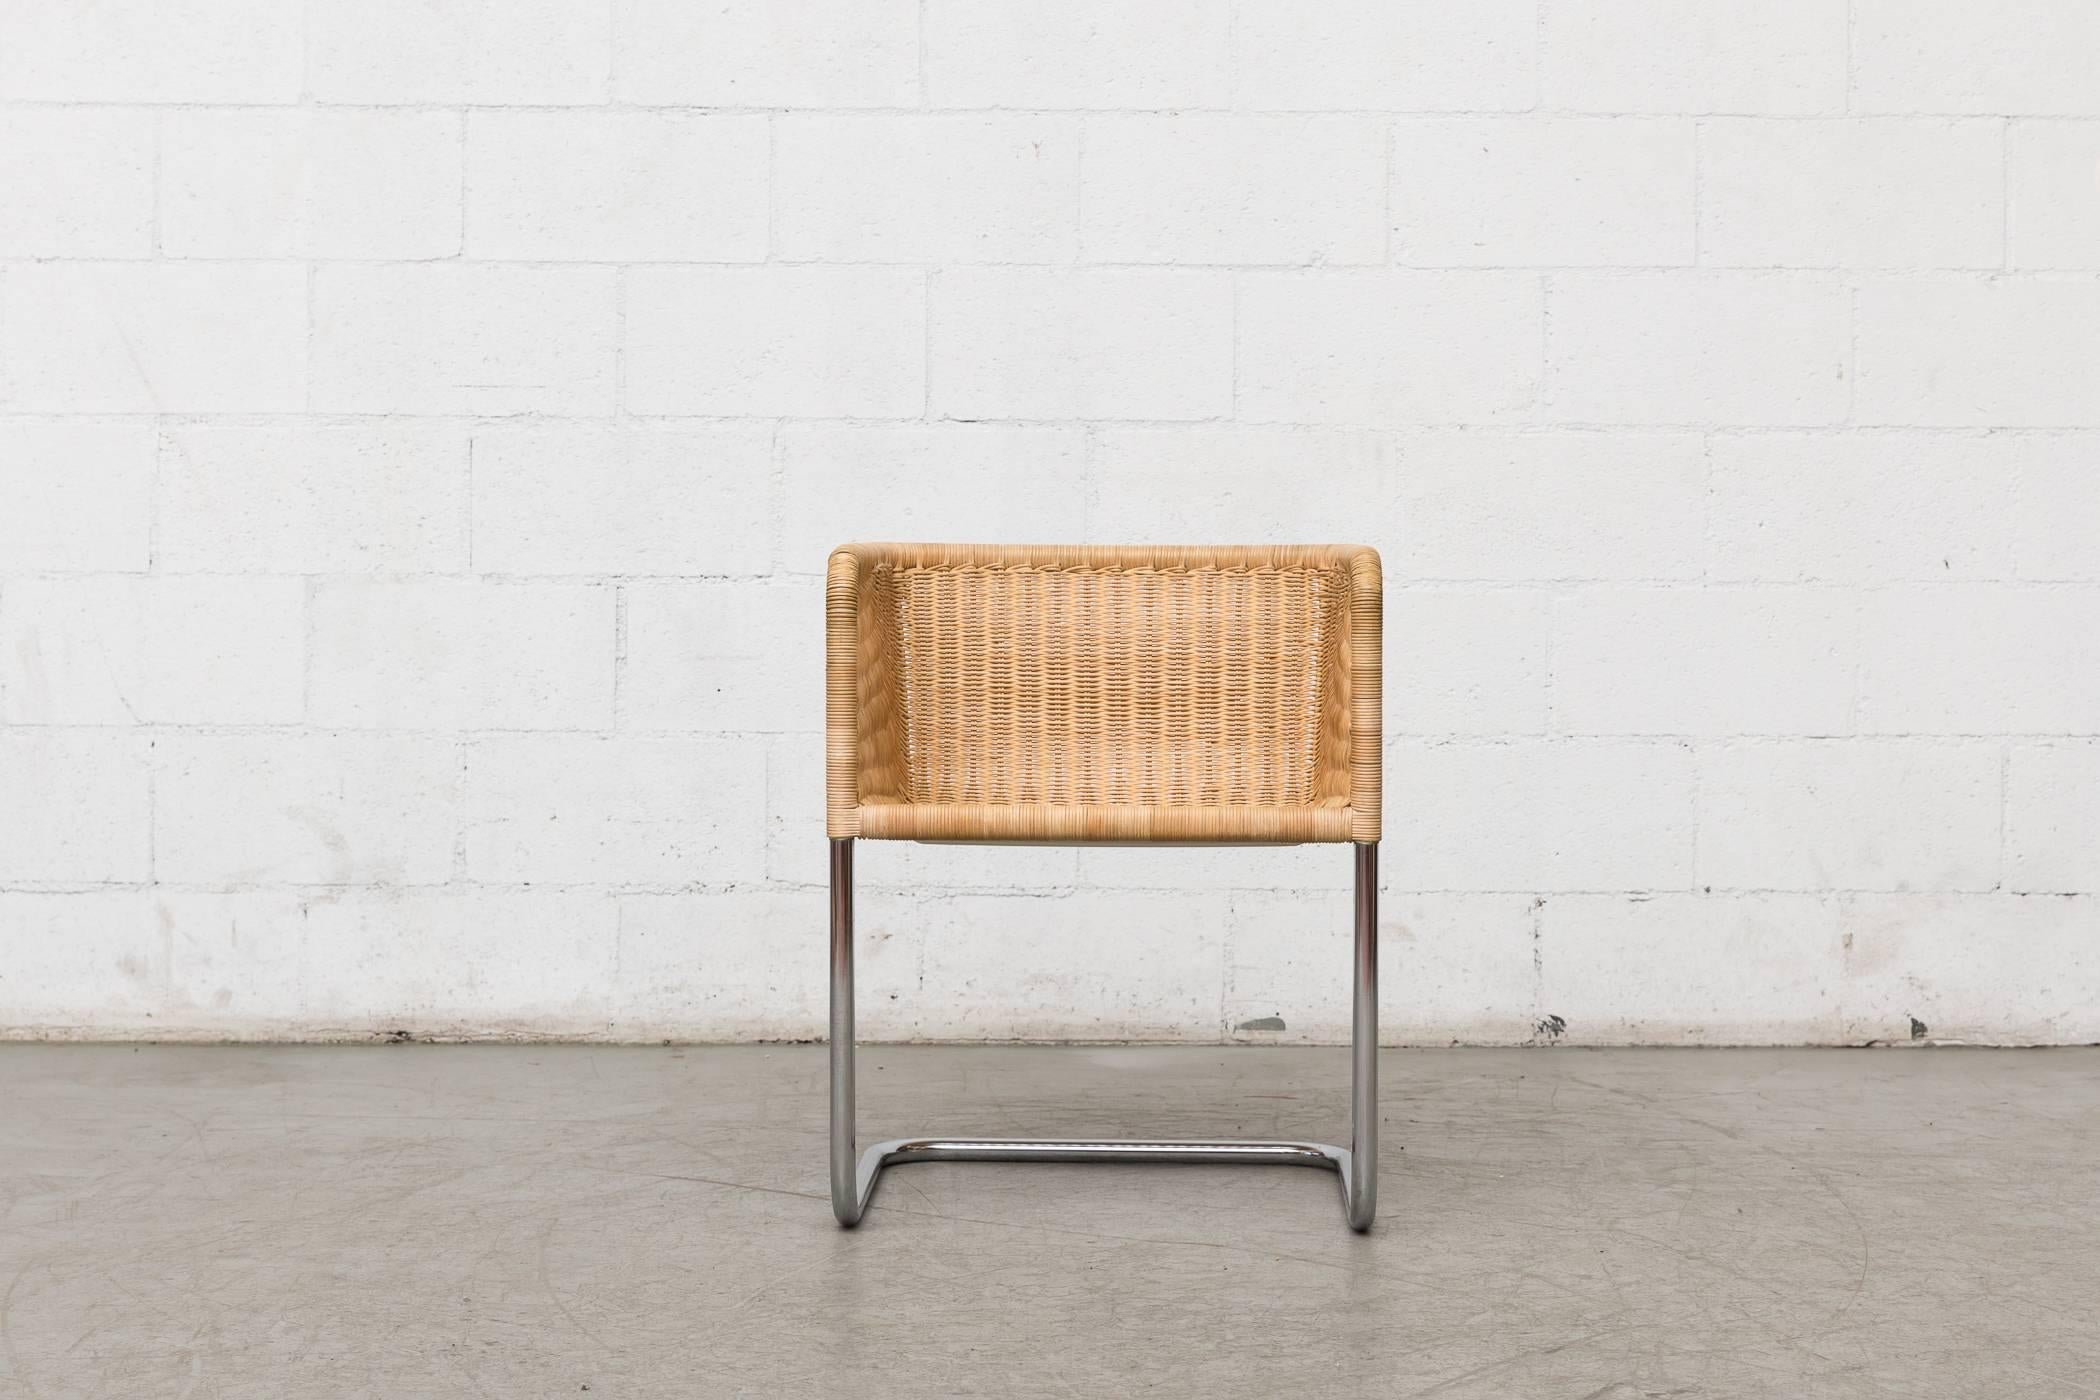 Cantilevered woven rattan chair designed by Preben Fabricius & Jorgen Kastholm. Wicker bucket seat on a cantilevered chrome frame. Original condition.